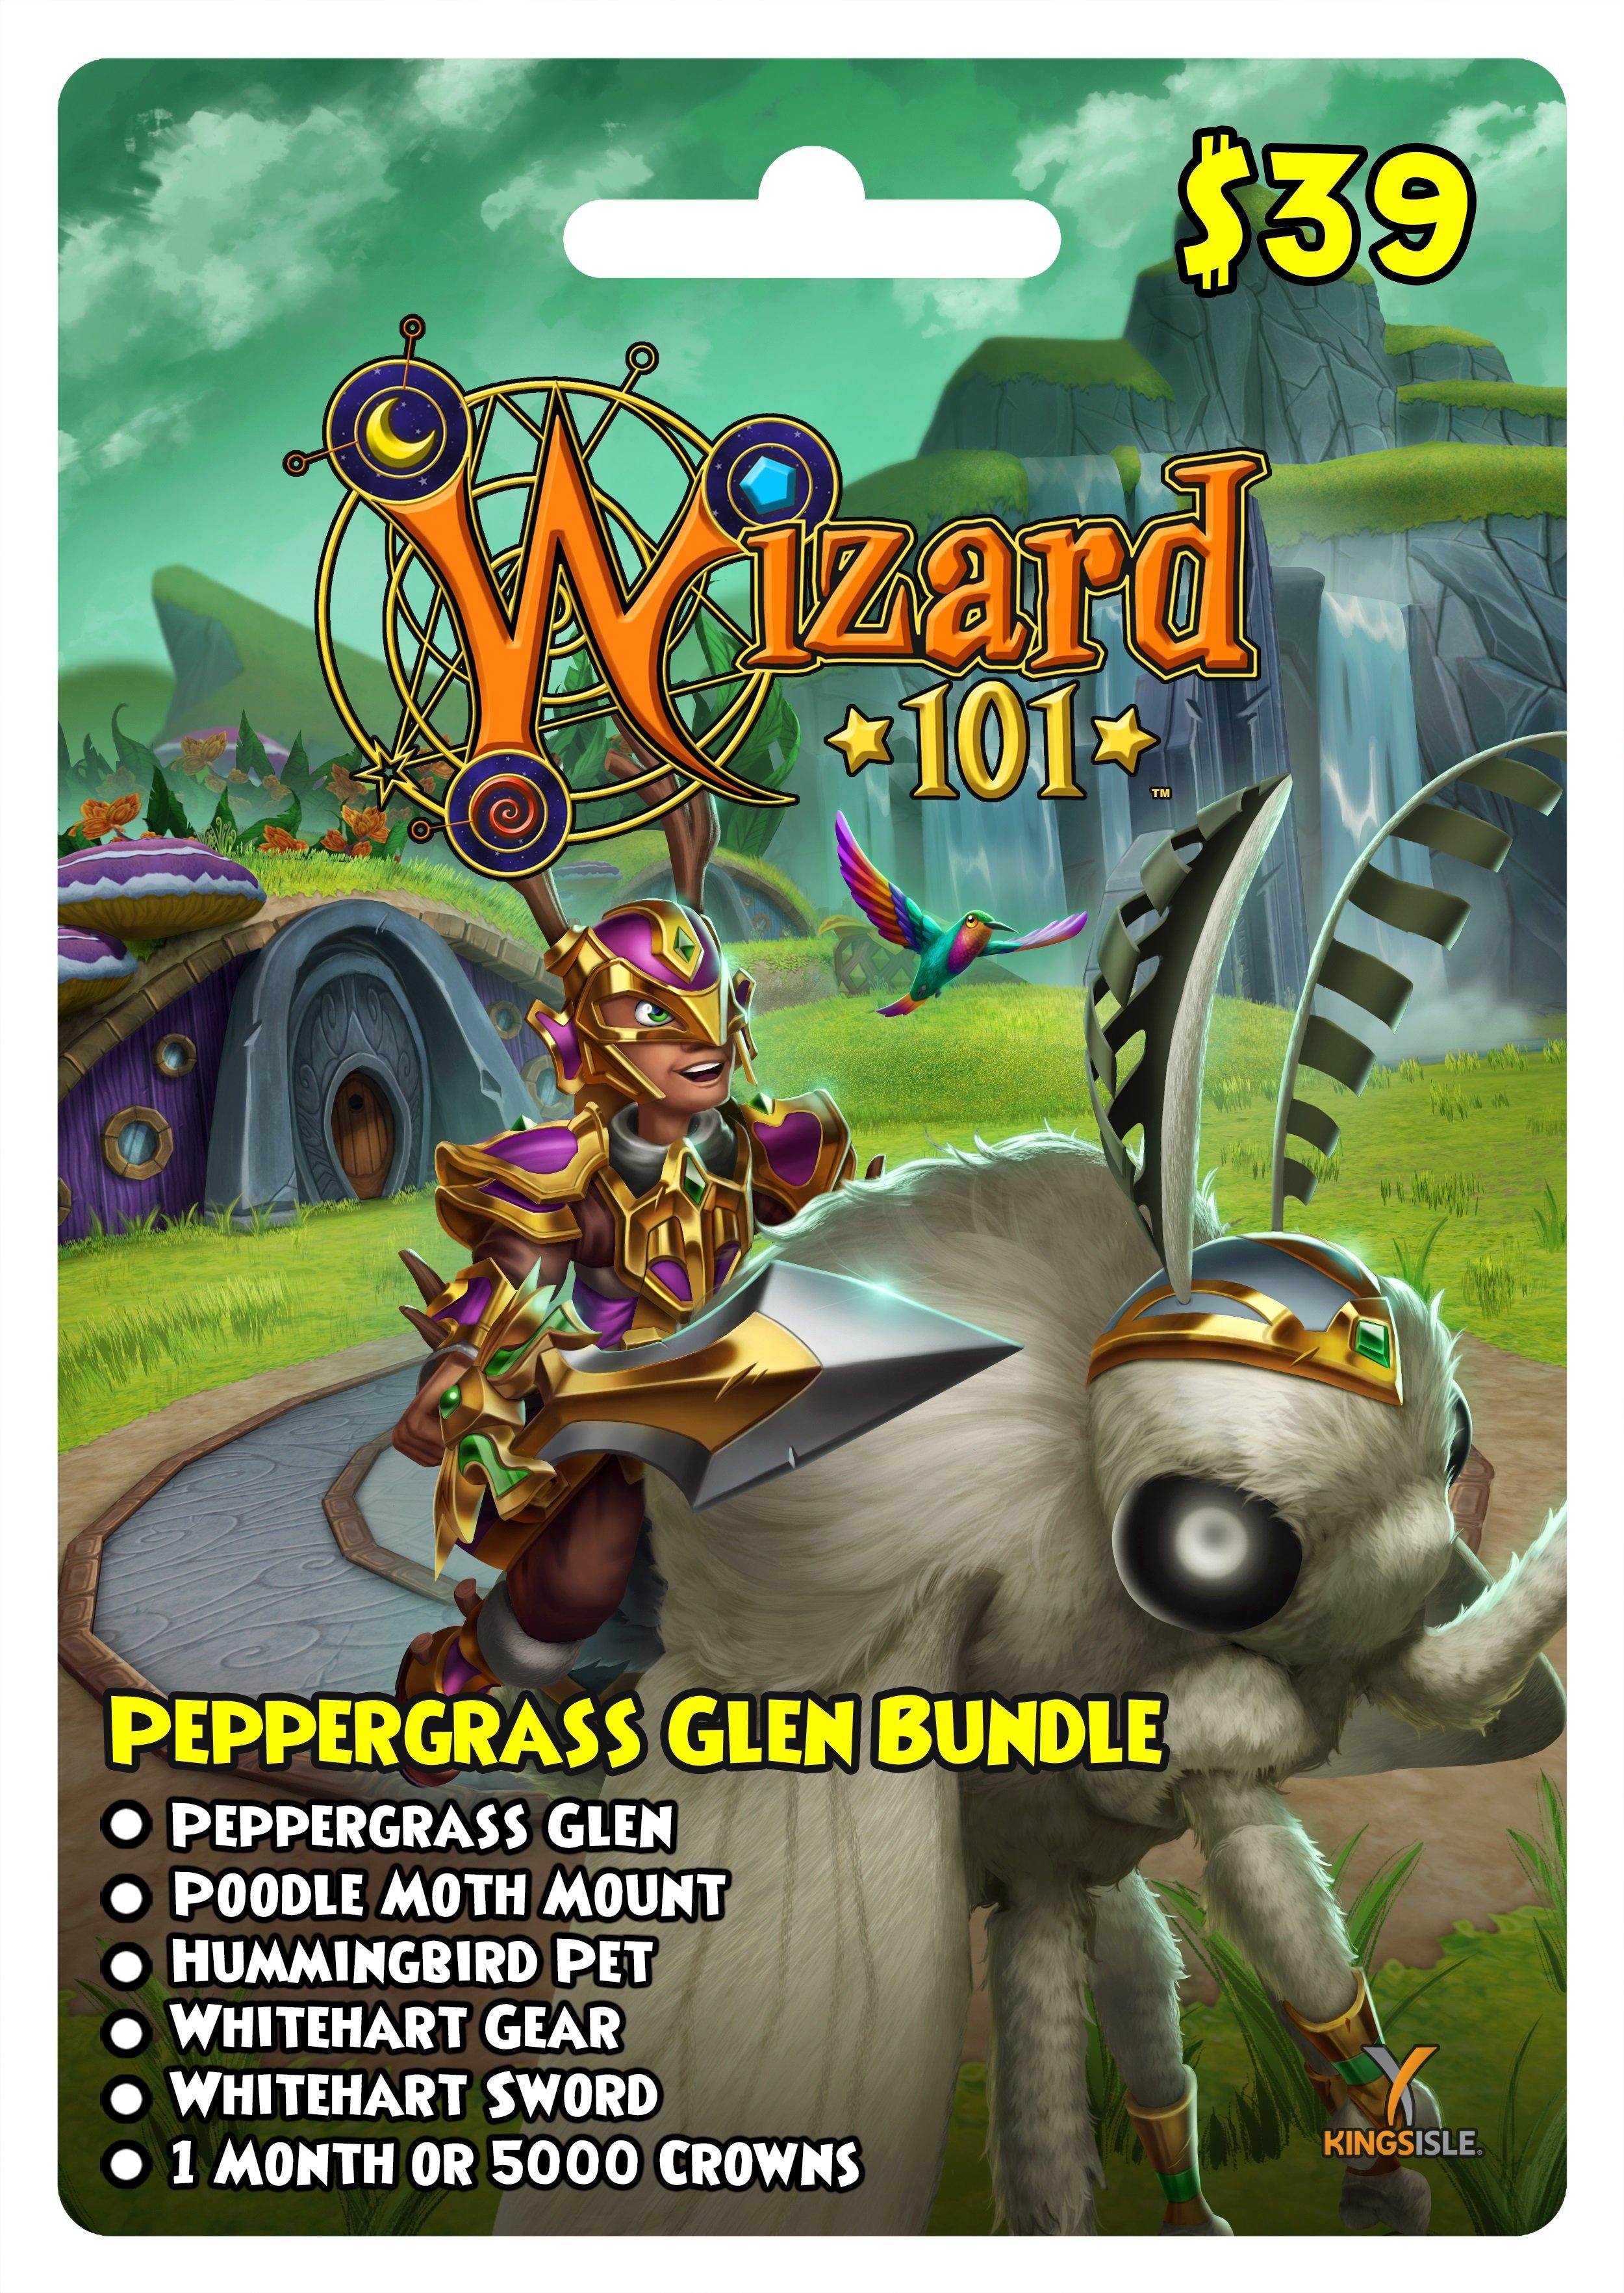 Wizard101: What is it?